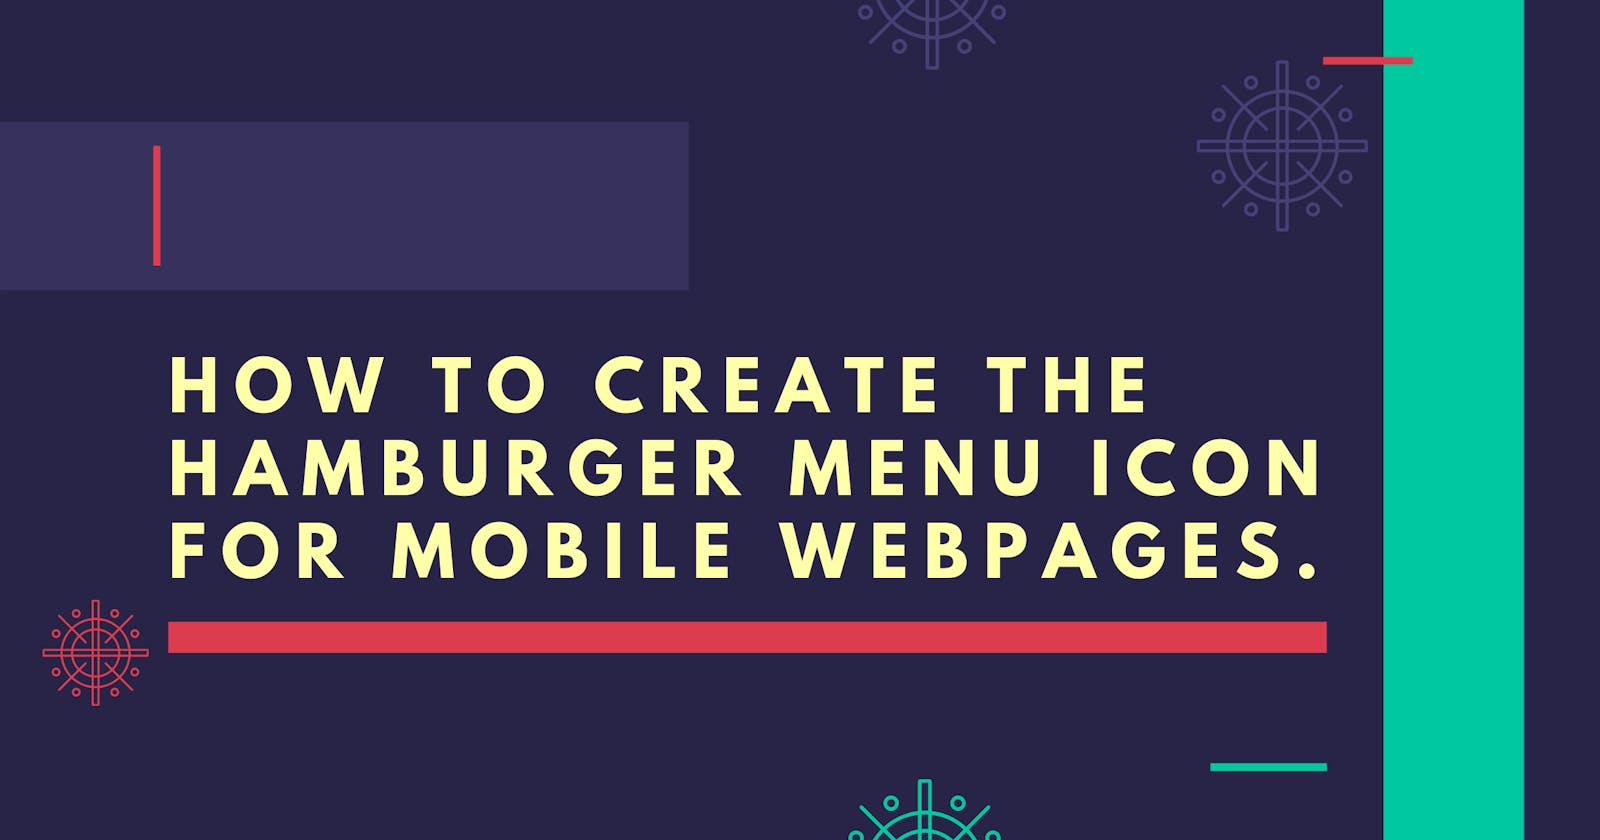 How to create the Hamburger Menu Icon for Mobile Webpages.